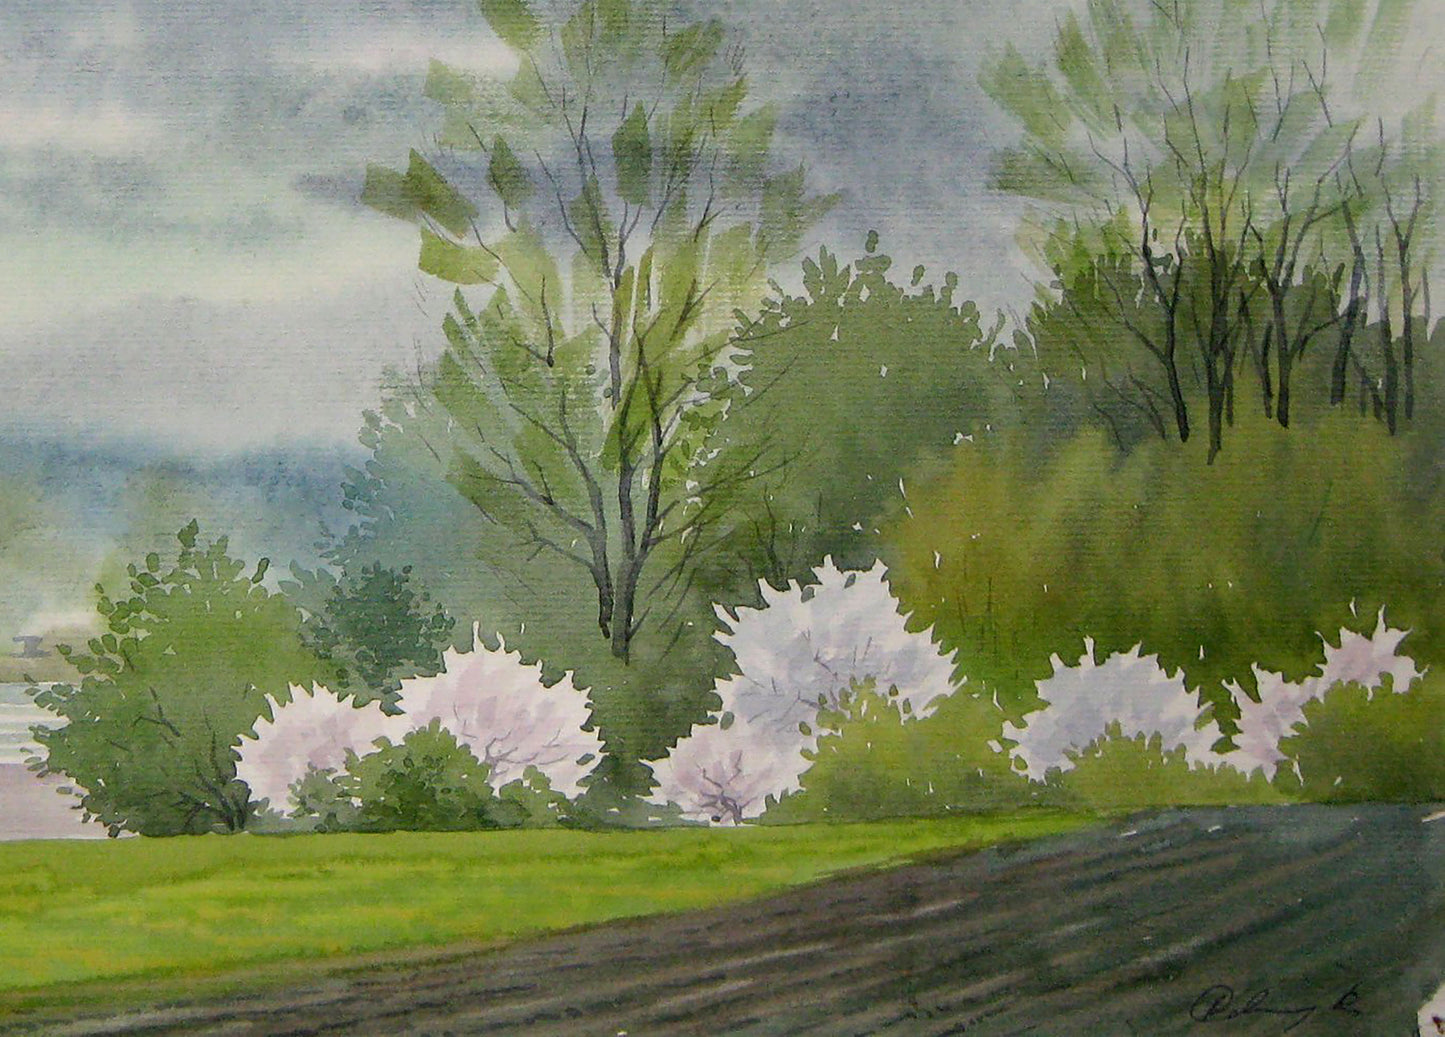 Watercolor painting In the farm fields Savenets Valery